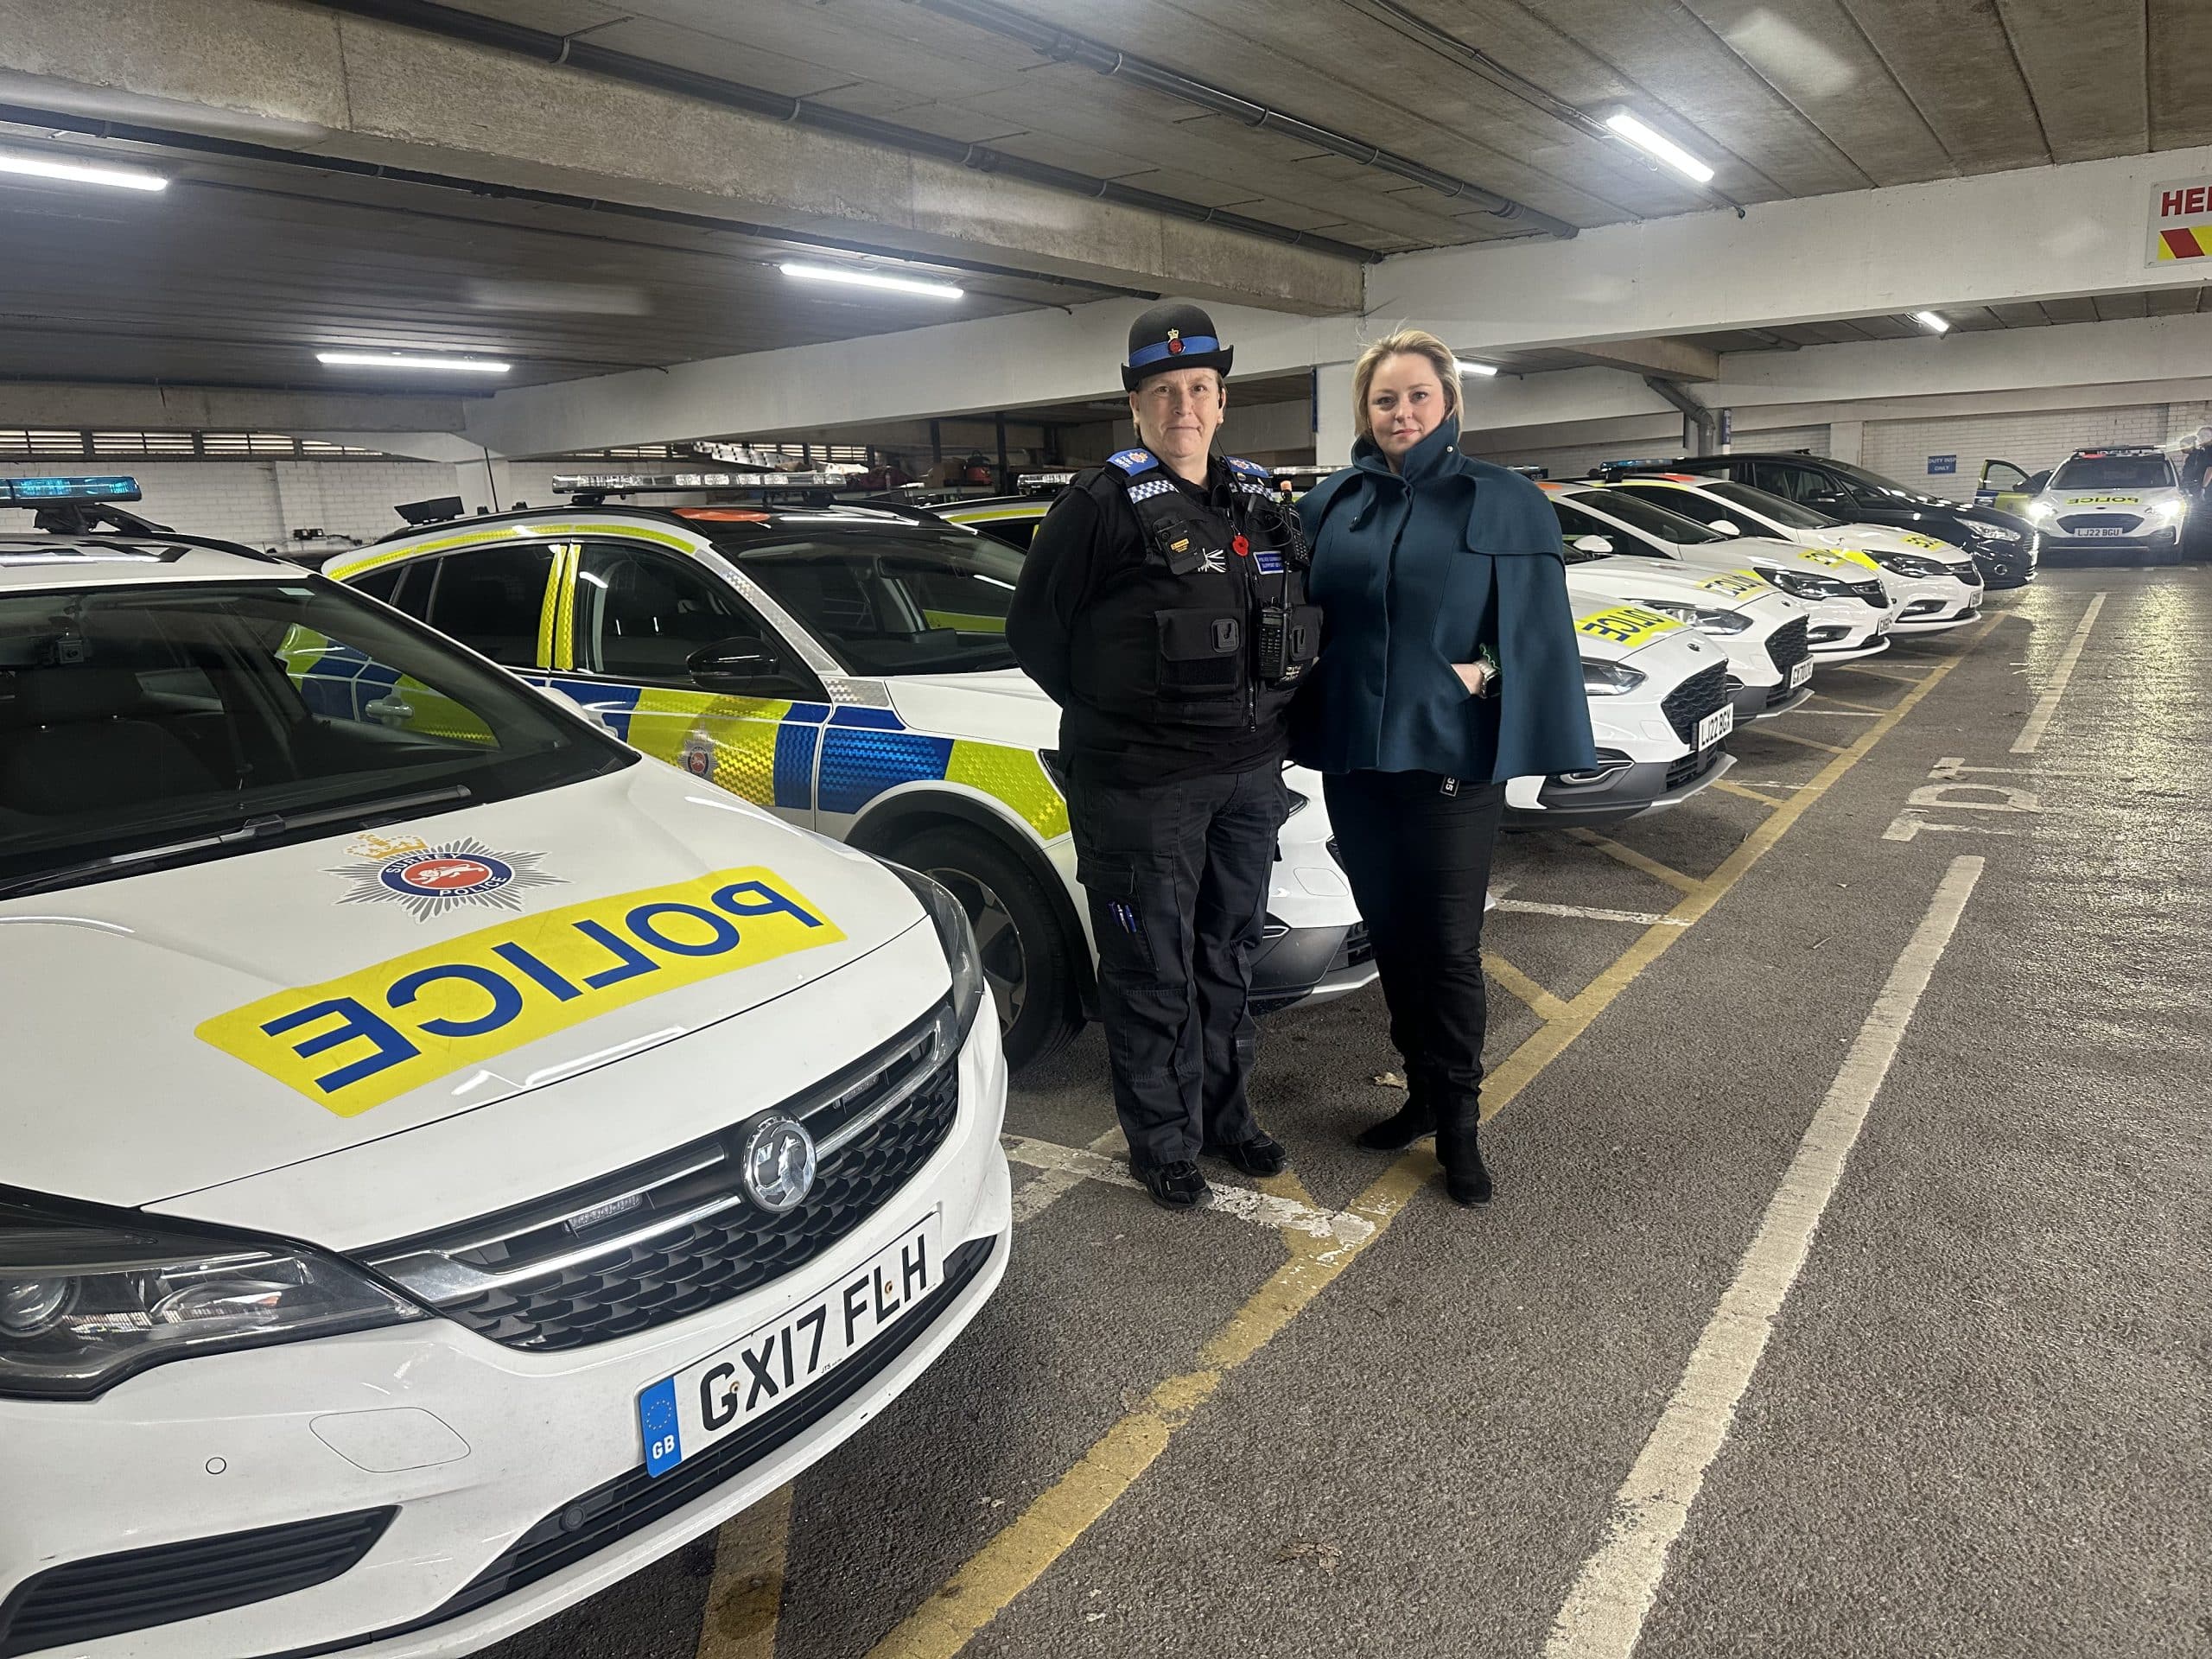 Police and Crime Commissioner Lisa Townsend with a female PCSO